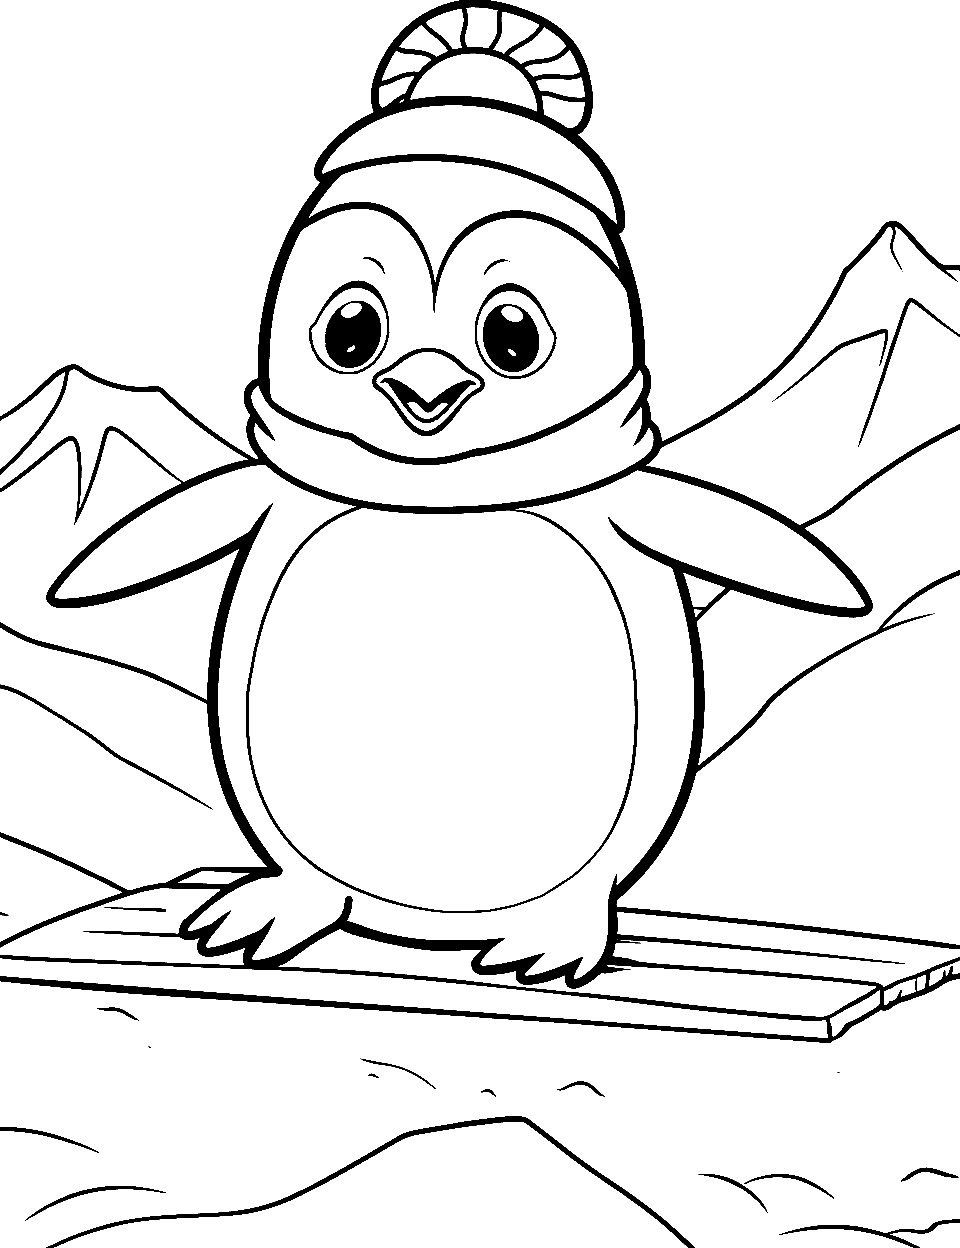 Fun Penguin Slide Coloring Page - A penguin sliding on an icy slope.